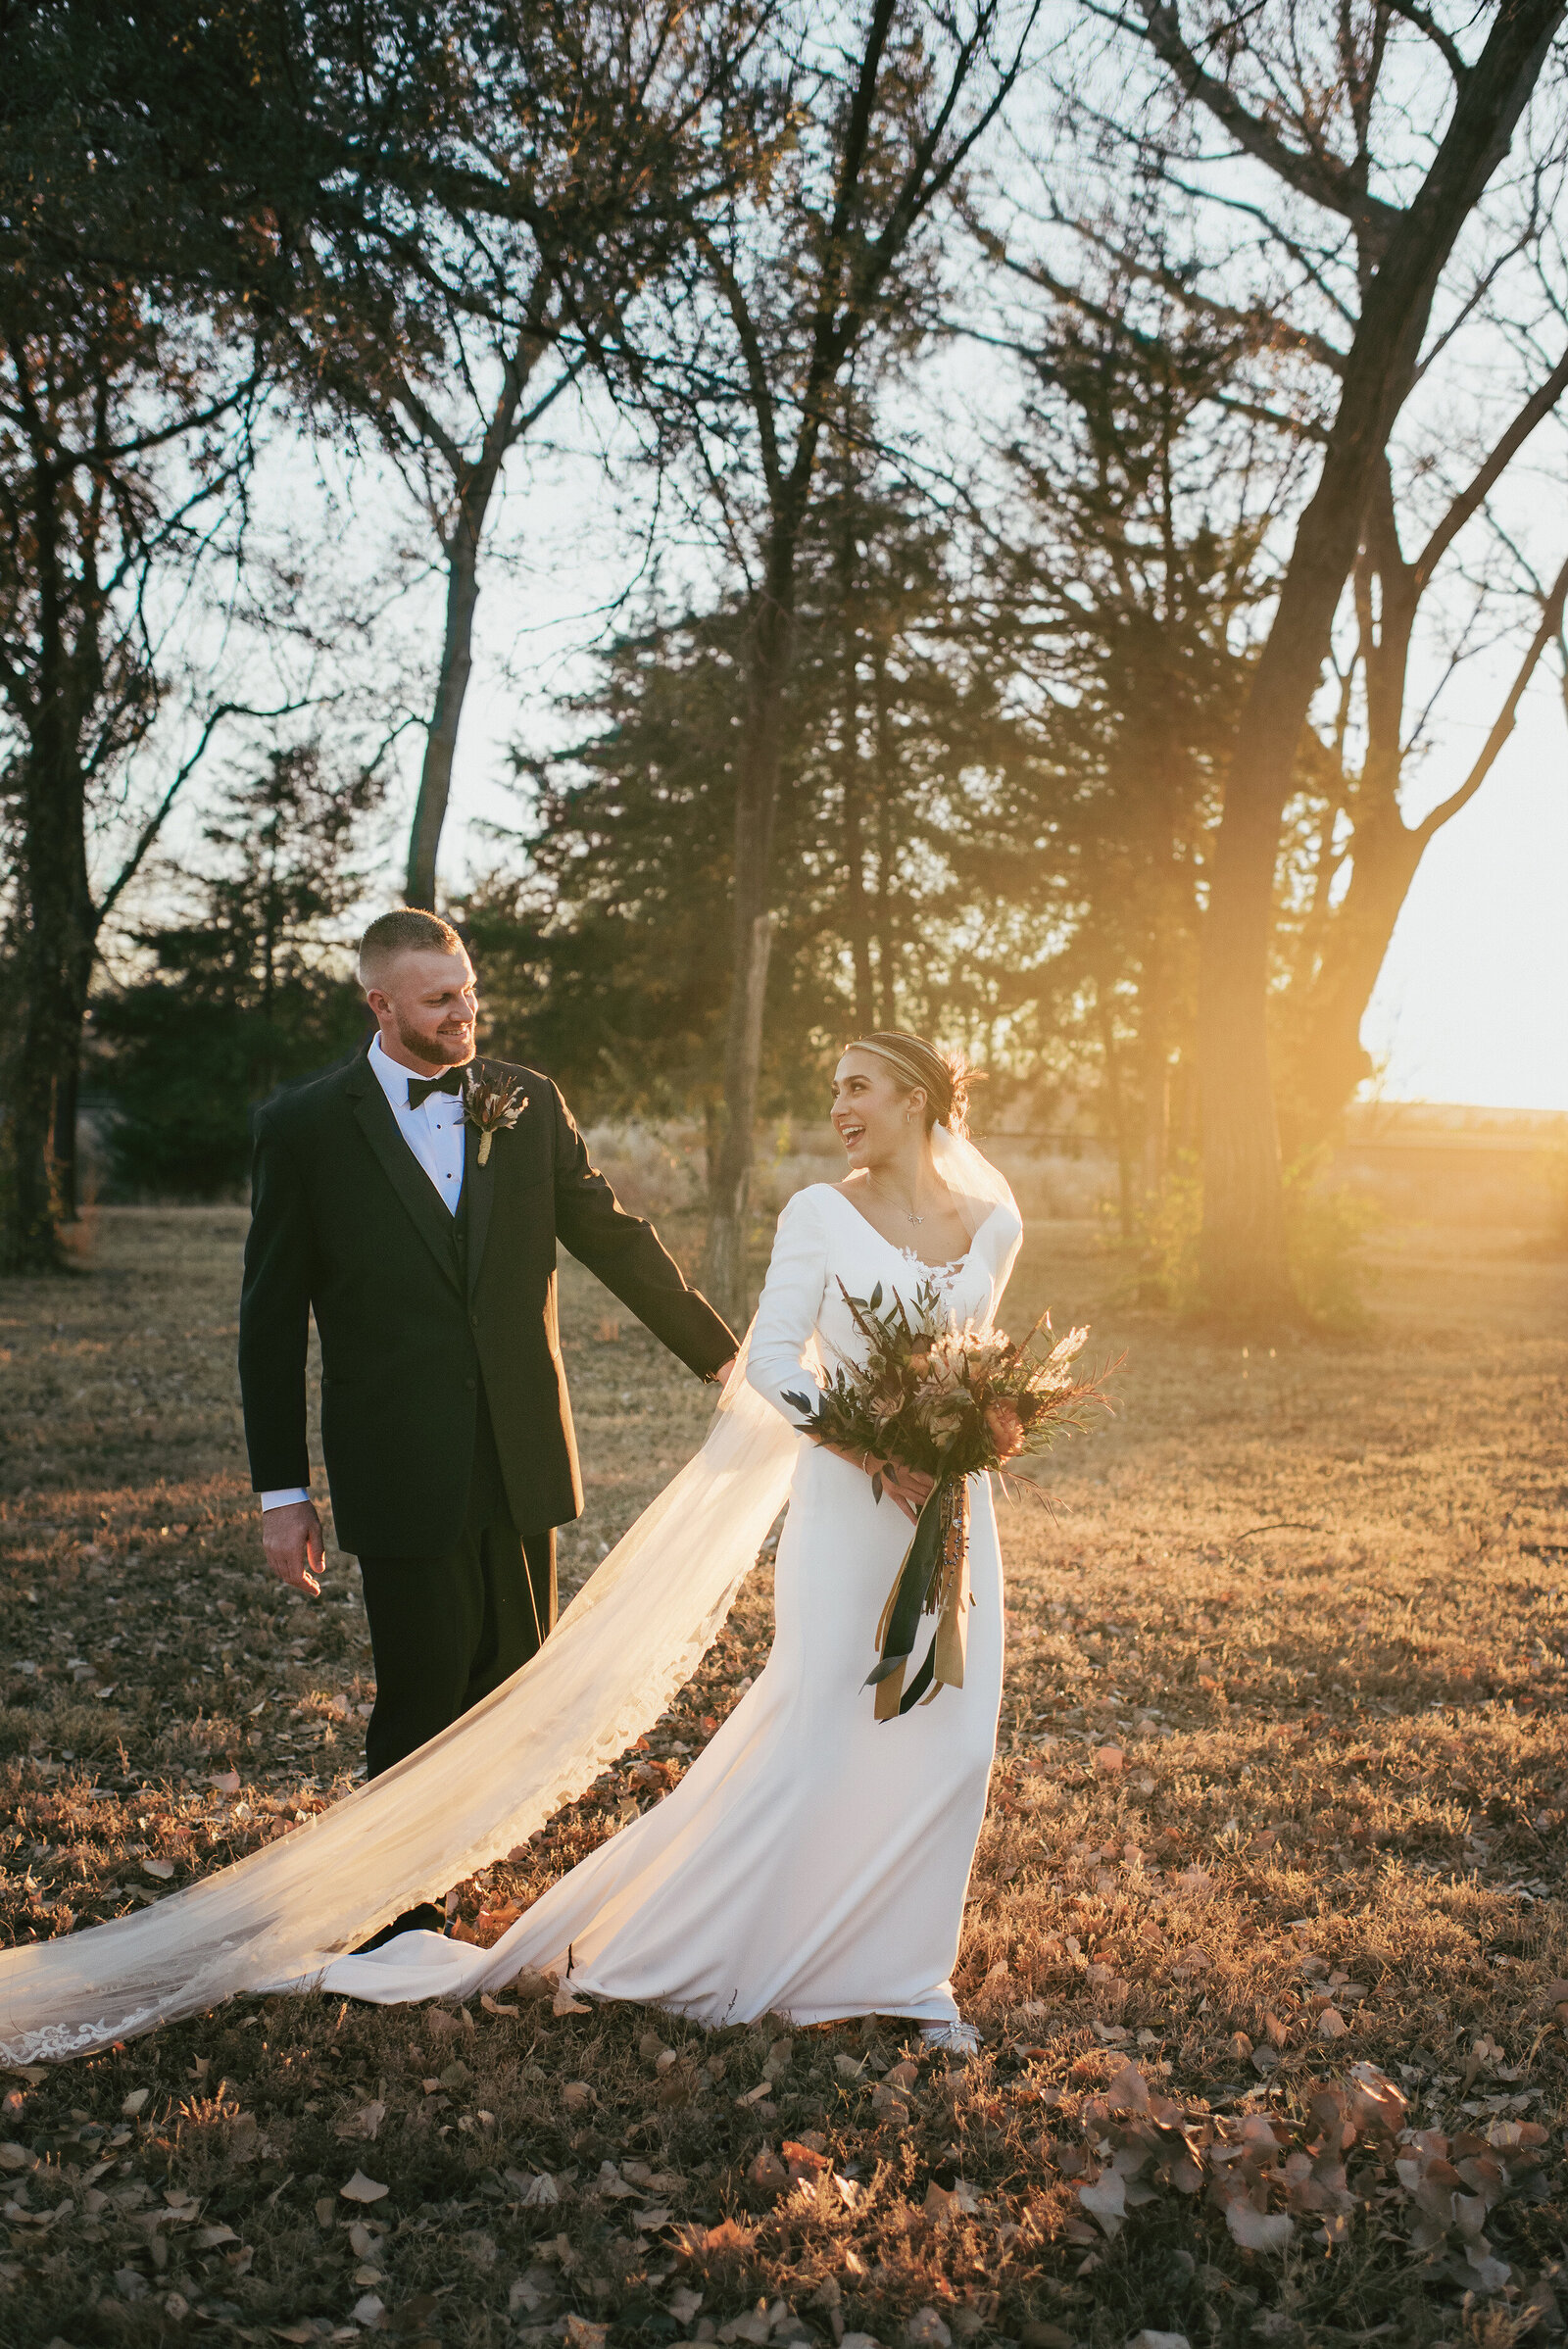 bride and groom walking into the sunset holding hands with the sun shining on them